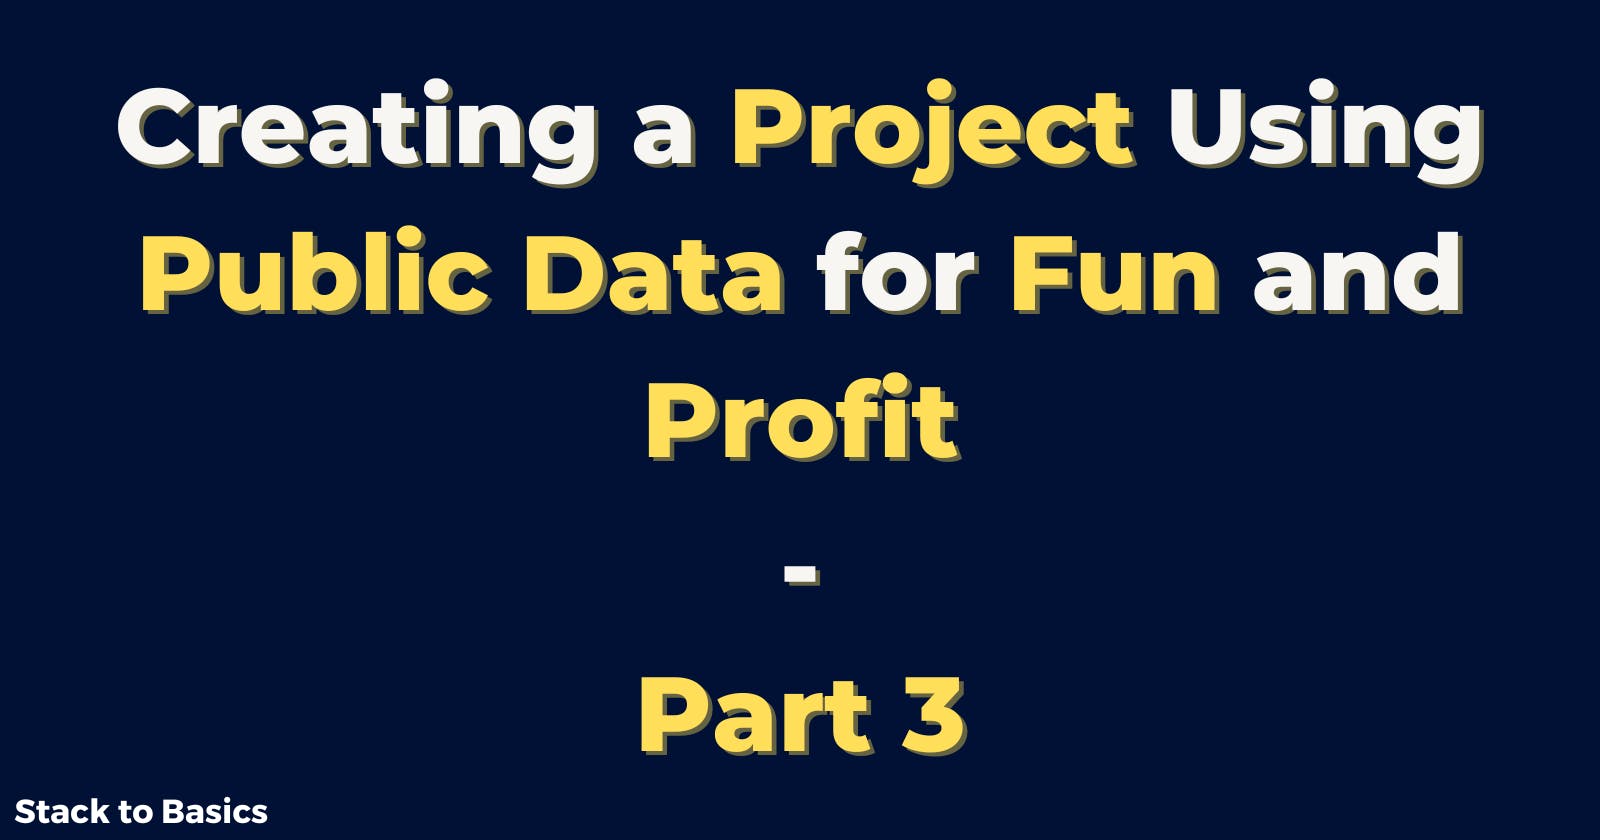 Creating a Project Using Public Data for Fun and Profit: Part 3